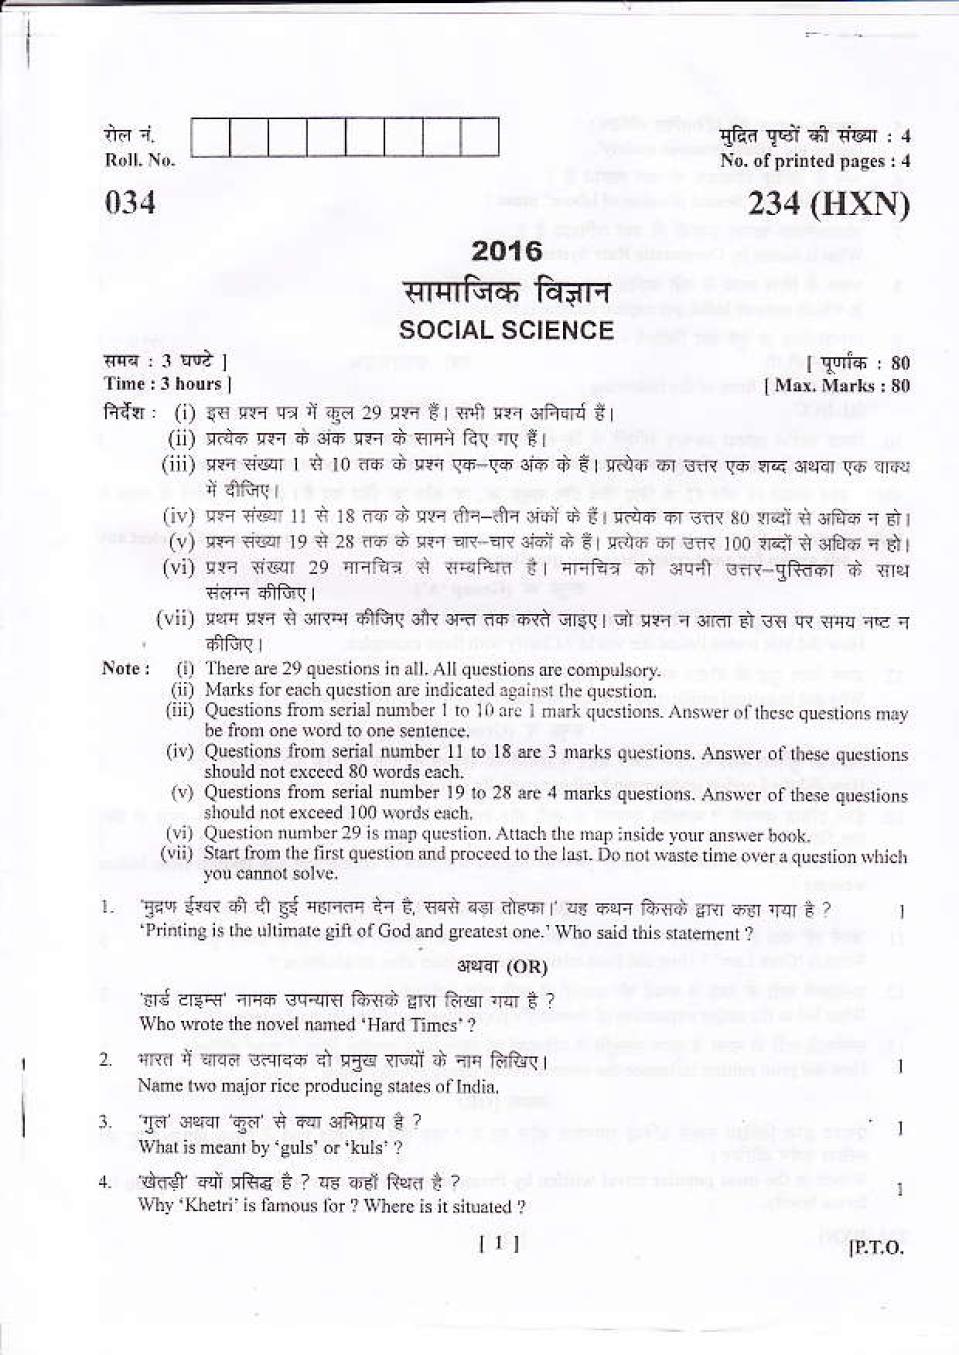 Uttarakhand Board Class 10 Question Paper 2016 for Social Science - Page 1